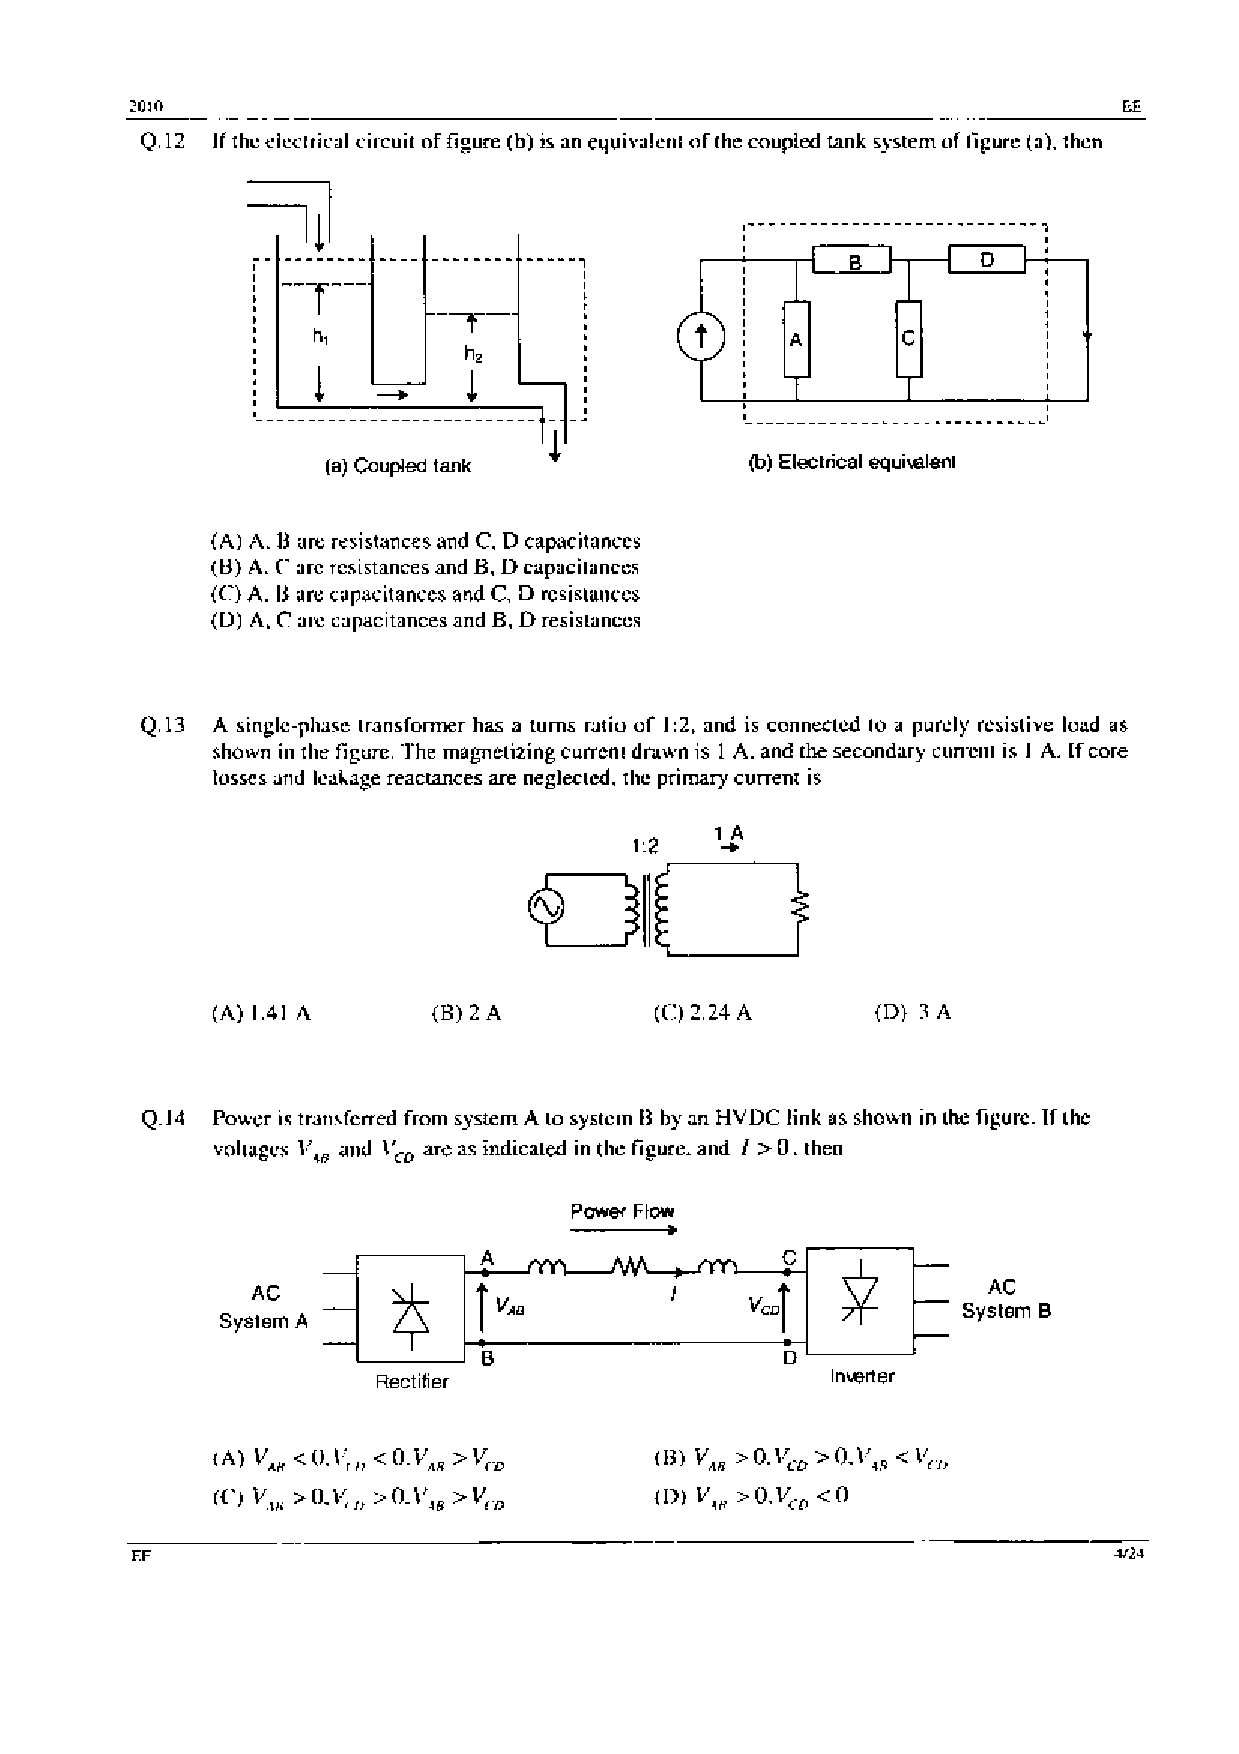 GATE Exam Question Paper 2010 Electrical Engineering 4